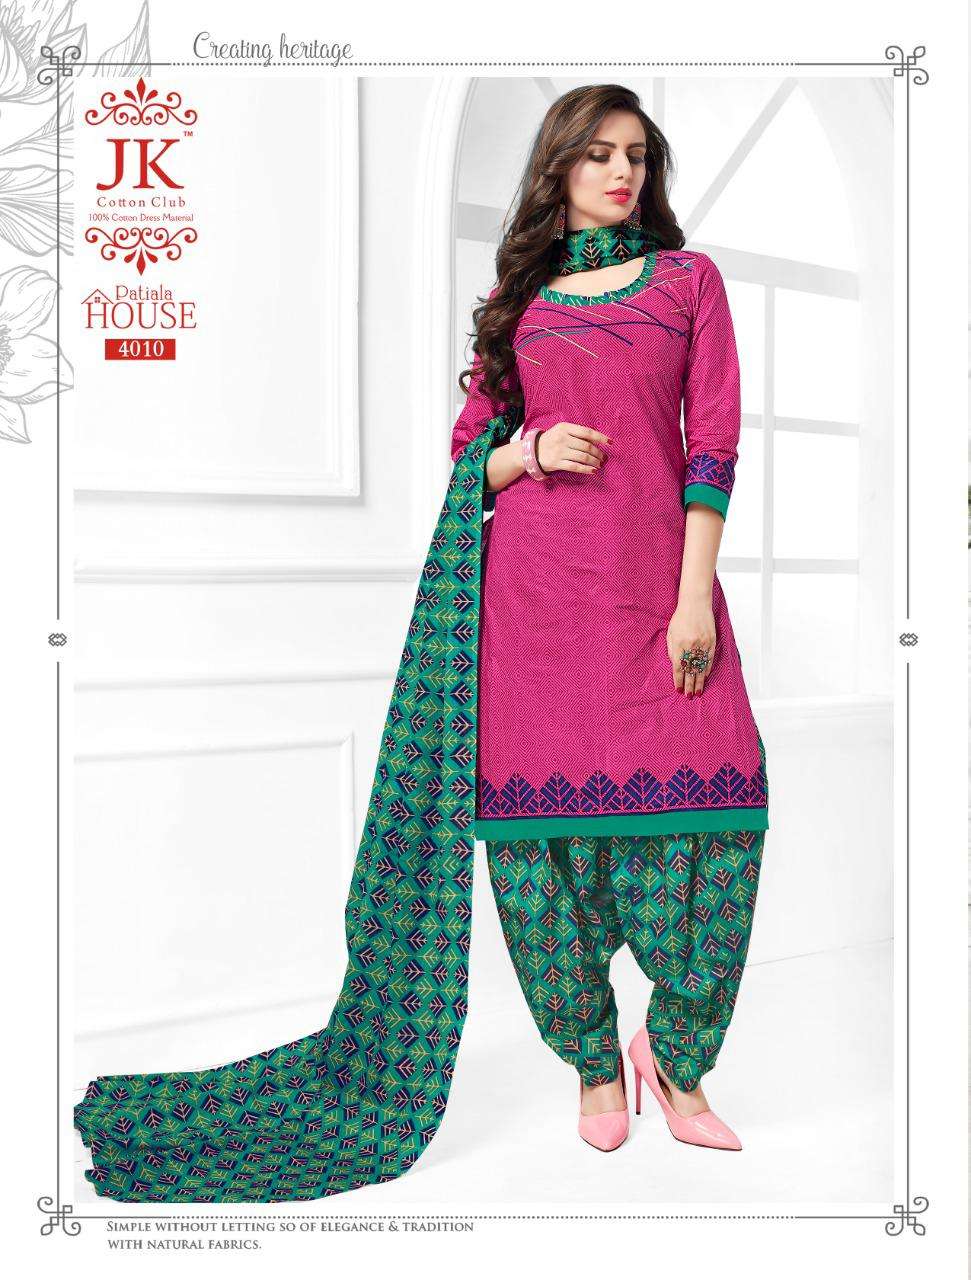 PATIYALA HOUSE VOL-4 BY JK COTTON CLUB 4001 TO 4020 SERIES BEAUTIFUL COLORFUL STYLISH PRETTY PARTY WEAR CASUAL WEAR OCCASIONAL WEAR COTTON PRINTED DRESSES AT WHOLESALE PRICE